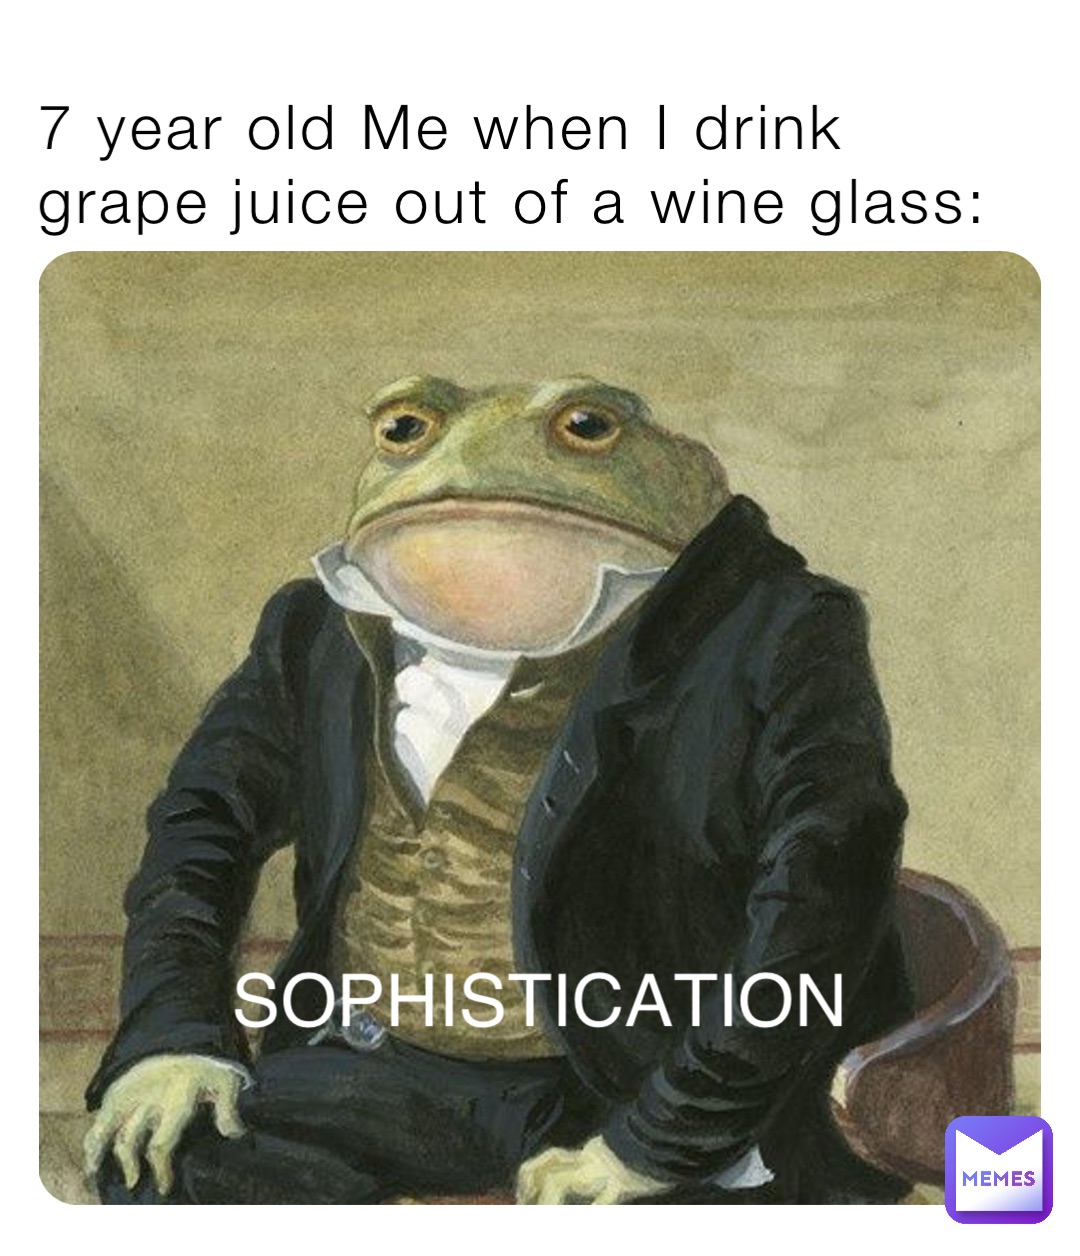 7 year old Me when I drink grape juice out of a wine glass: SOPHISTICATION